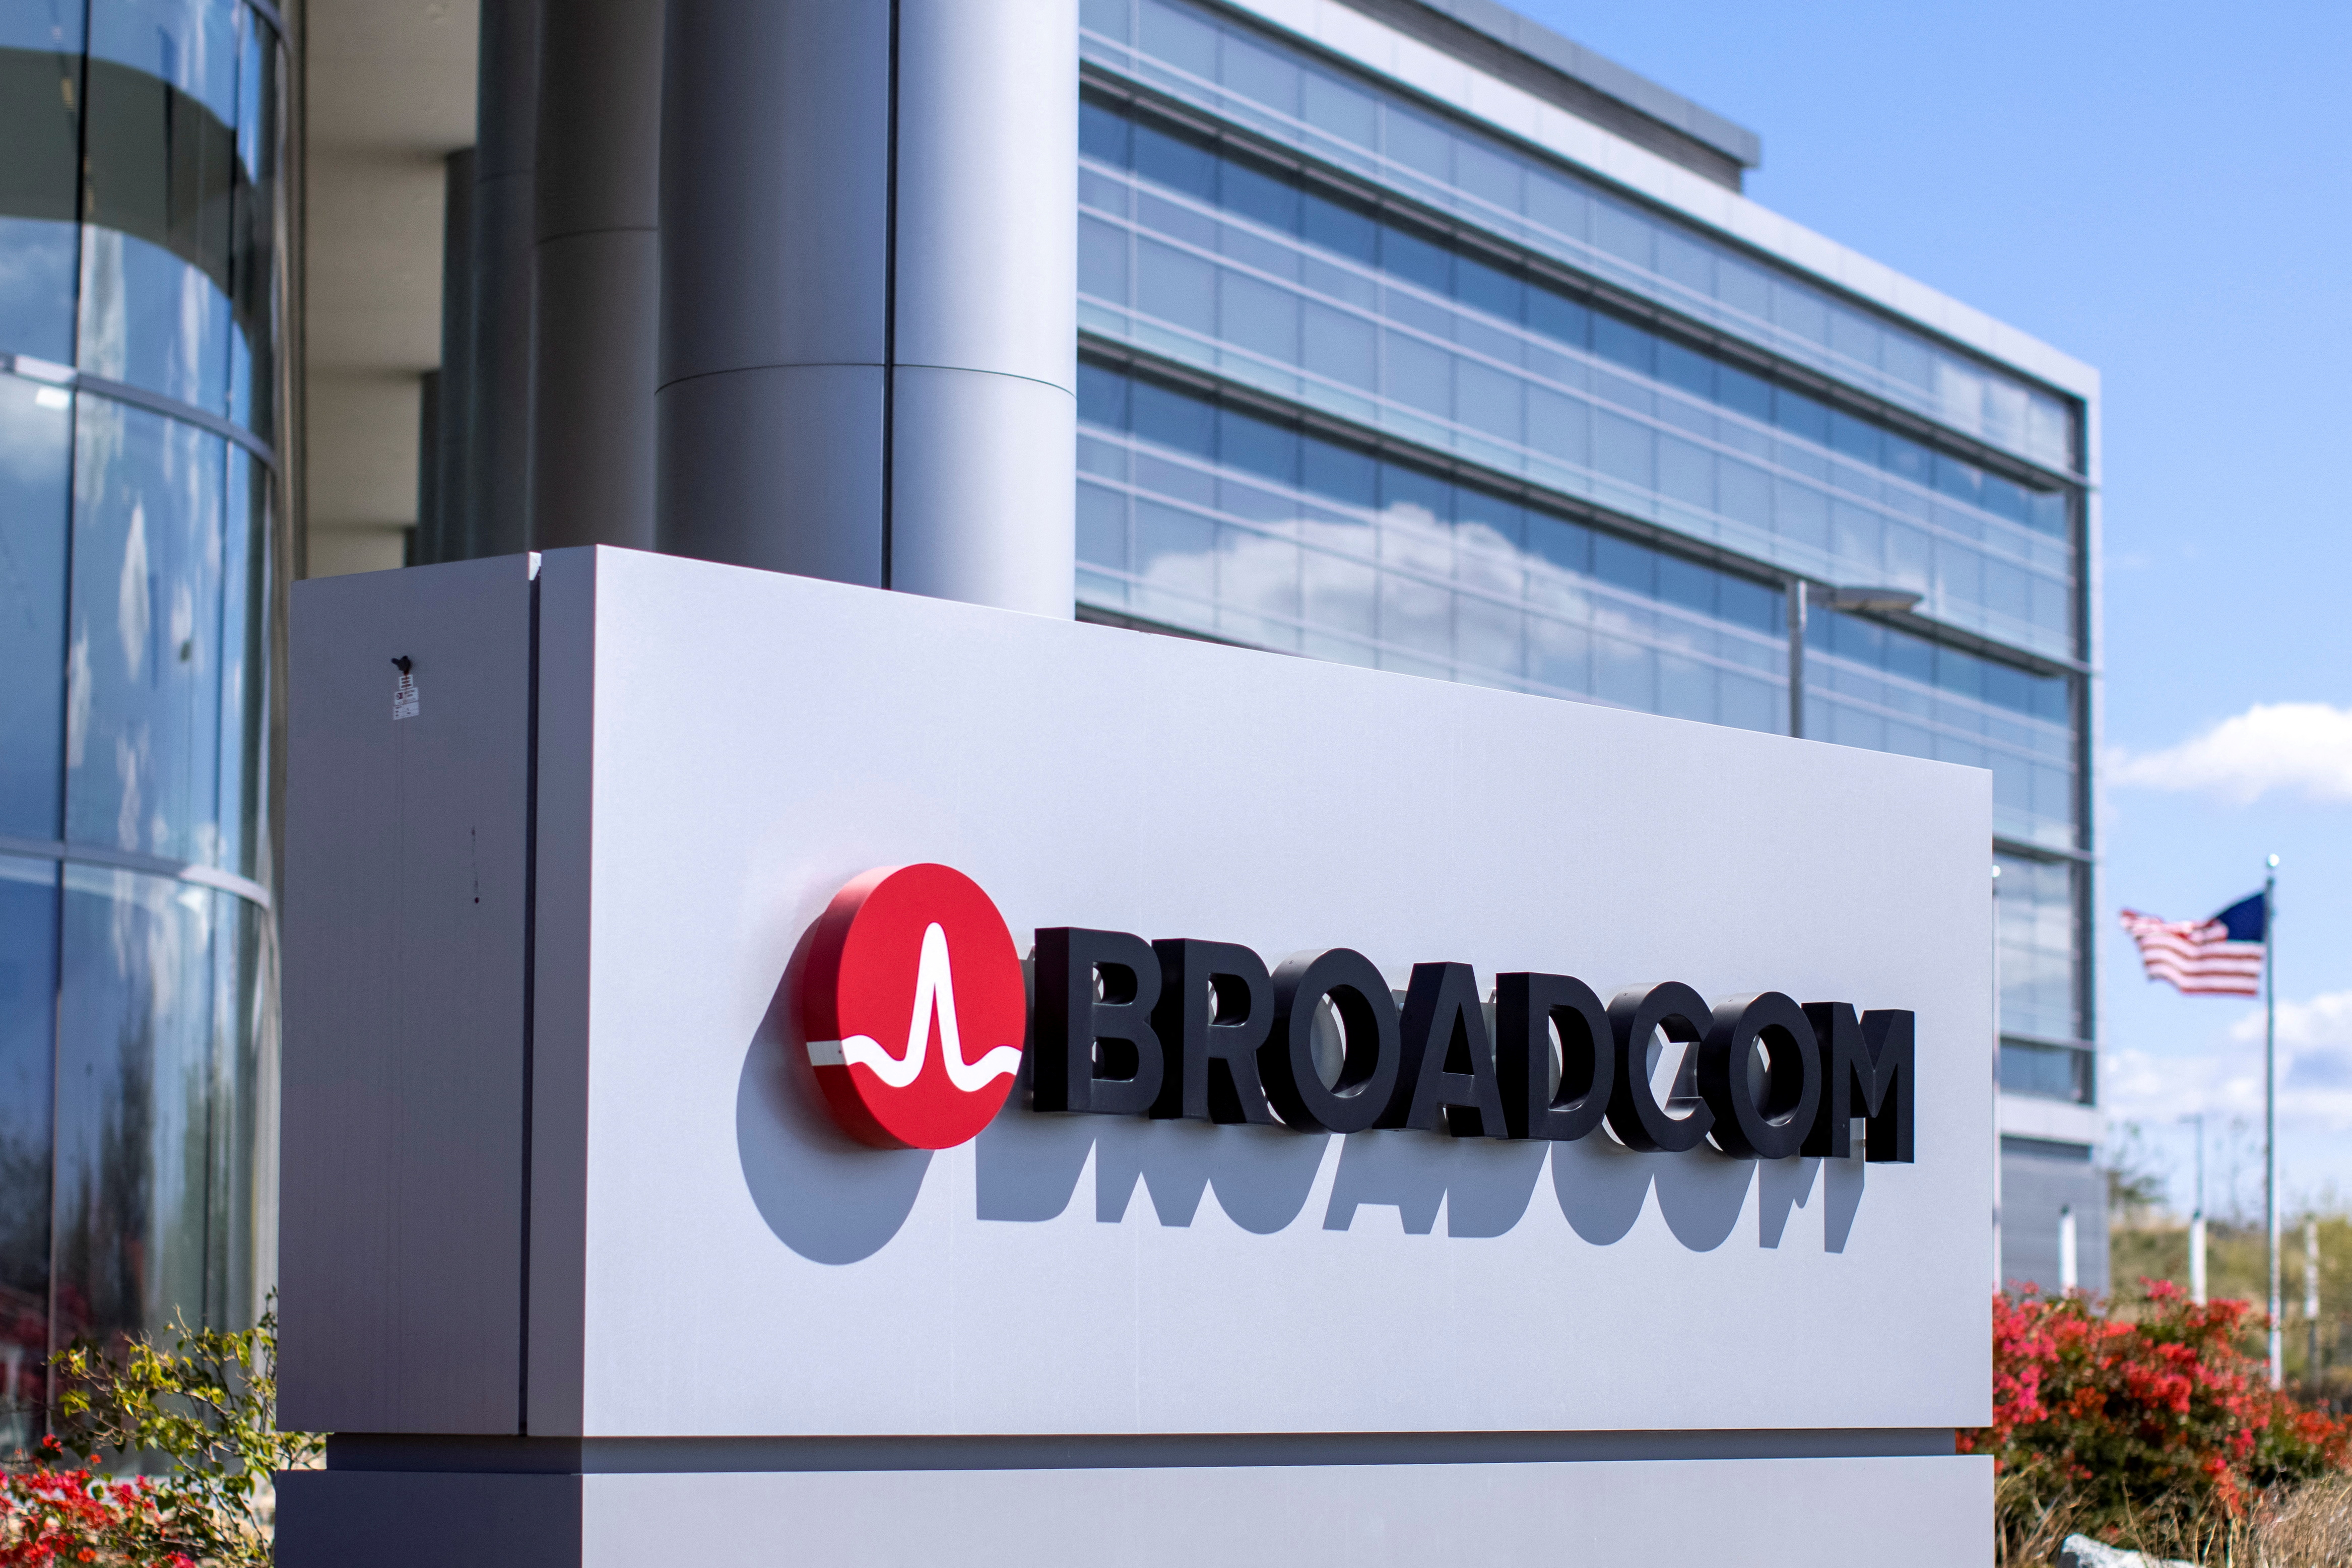 The Broadcom company logo is shown outside one of their office complexes in Irvine